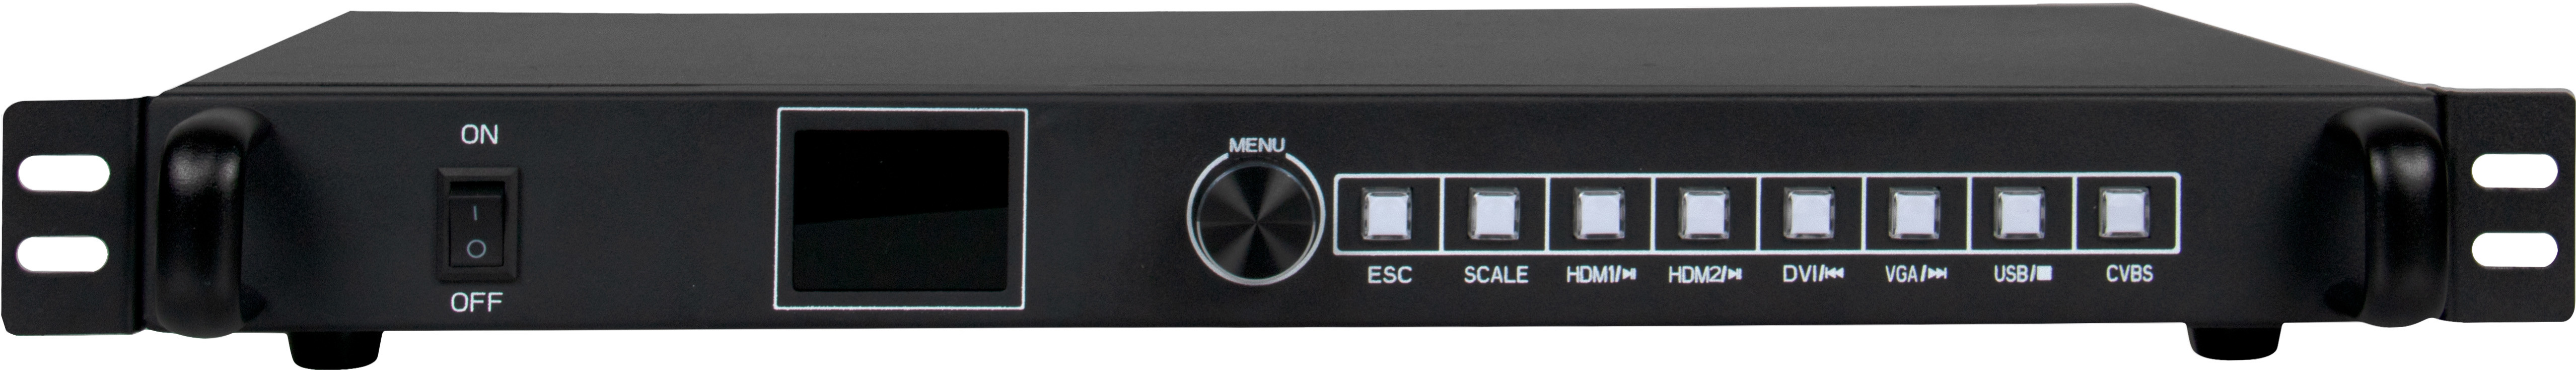 【S Series】Multitype Interface 2 In 1 S40 LED Video Processor